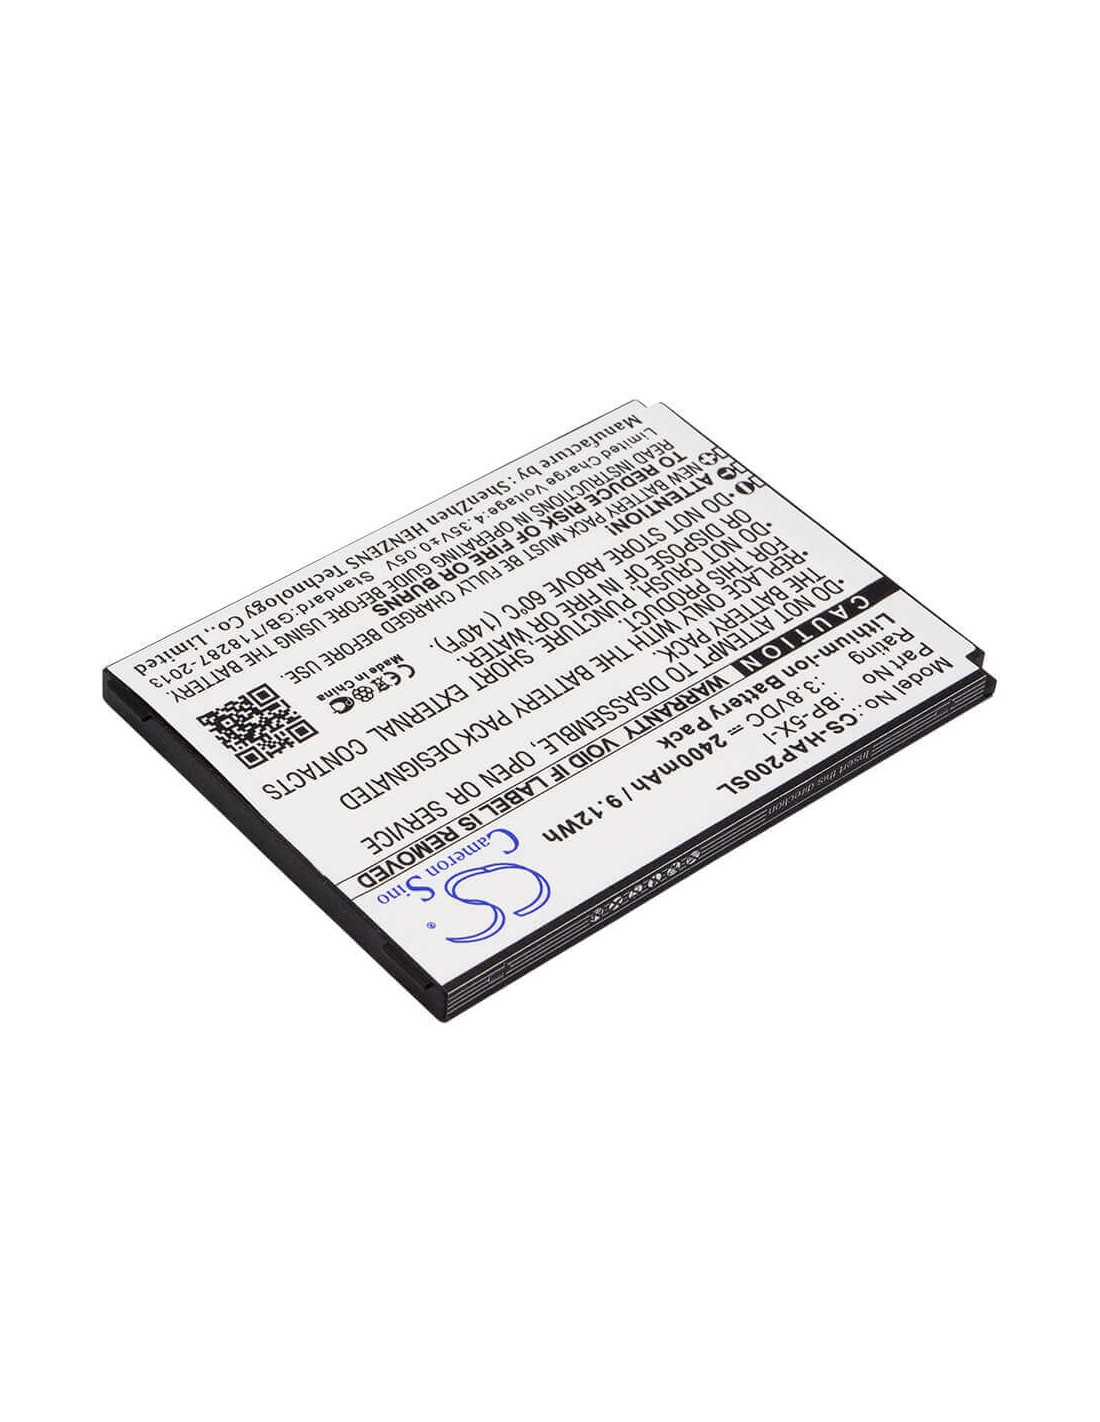 Battery for Highscreen, Boost2, Boost2 Se, Pure F, Innos, D10 D10c D10f 3.8V, 2400mAh - 9.12Wh